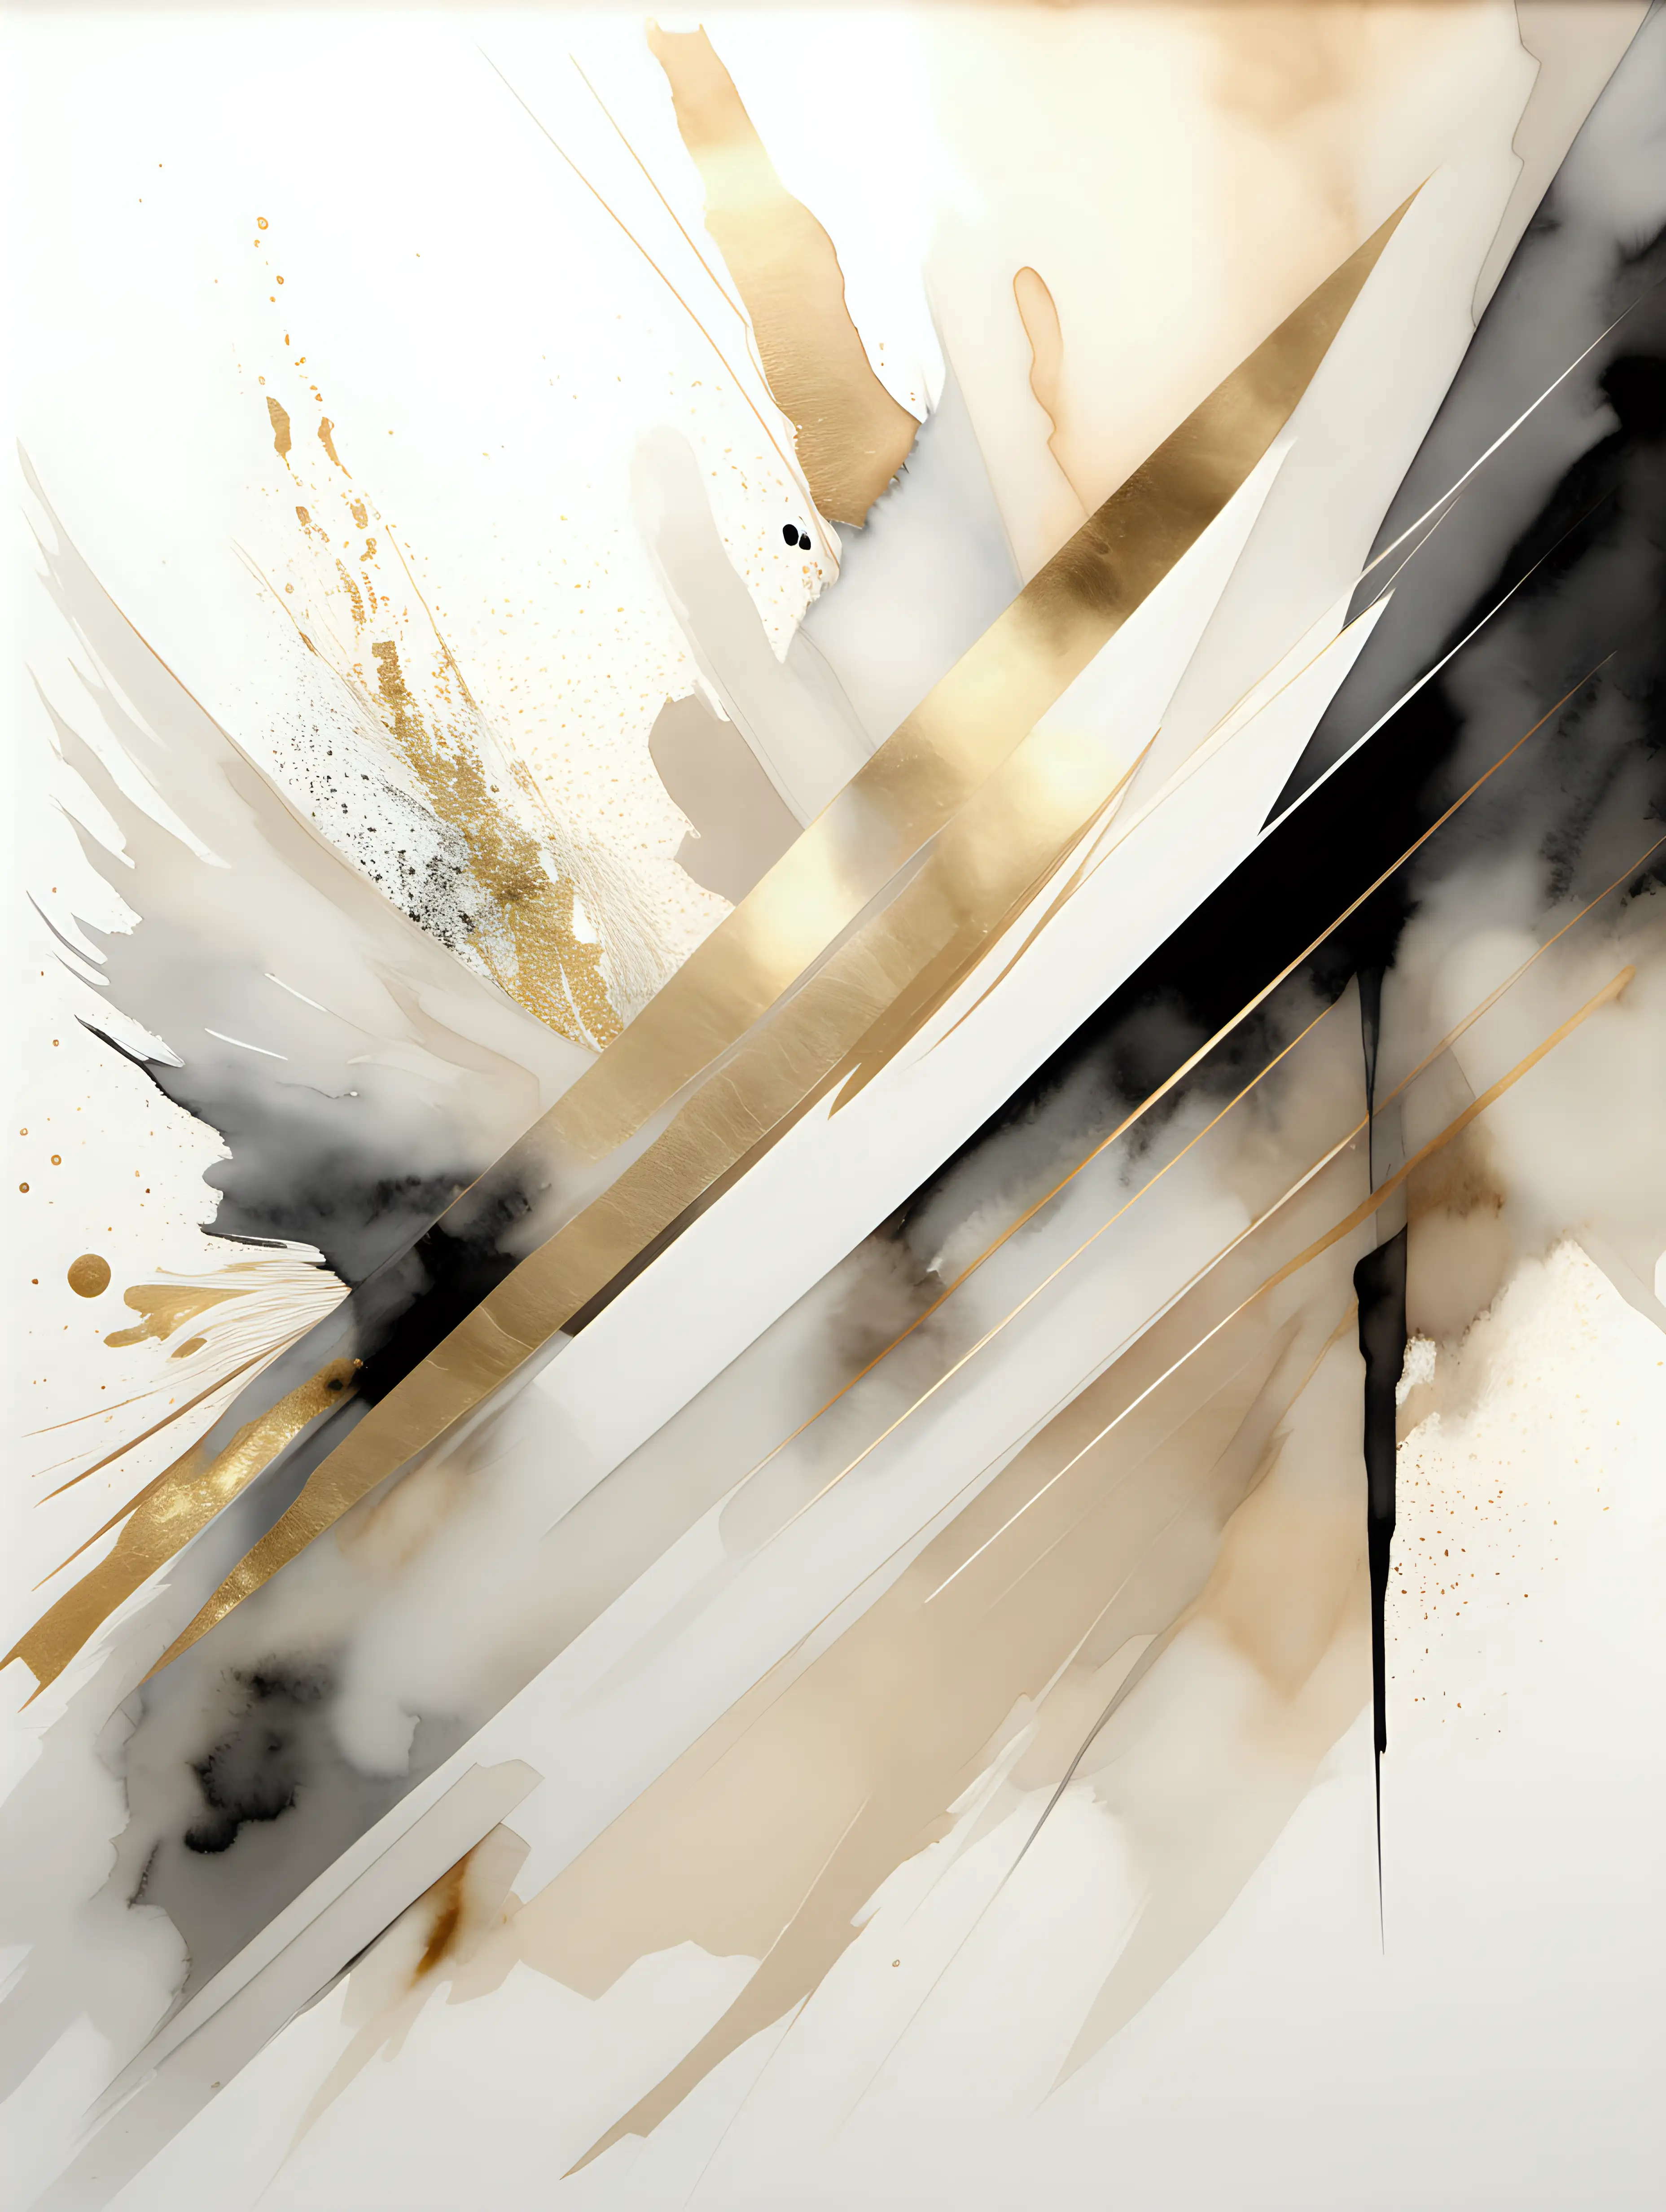 Large modern abstract image that incorporates light watercolours white, beige, gold and black. Diagnal theme